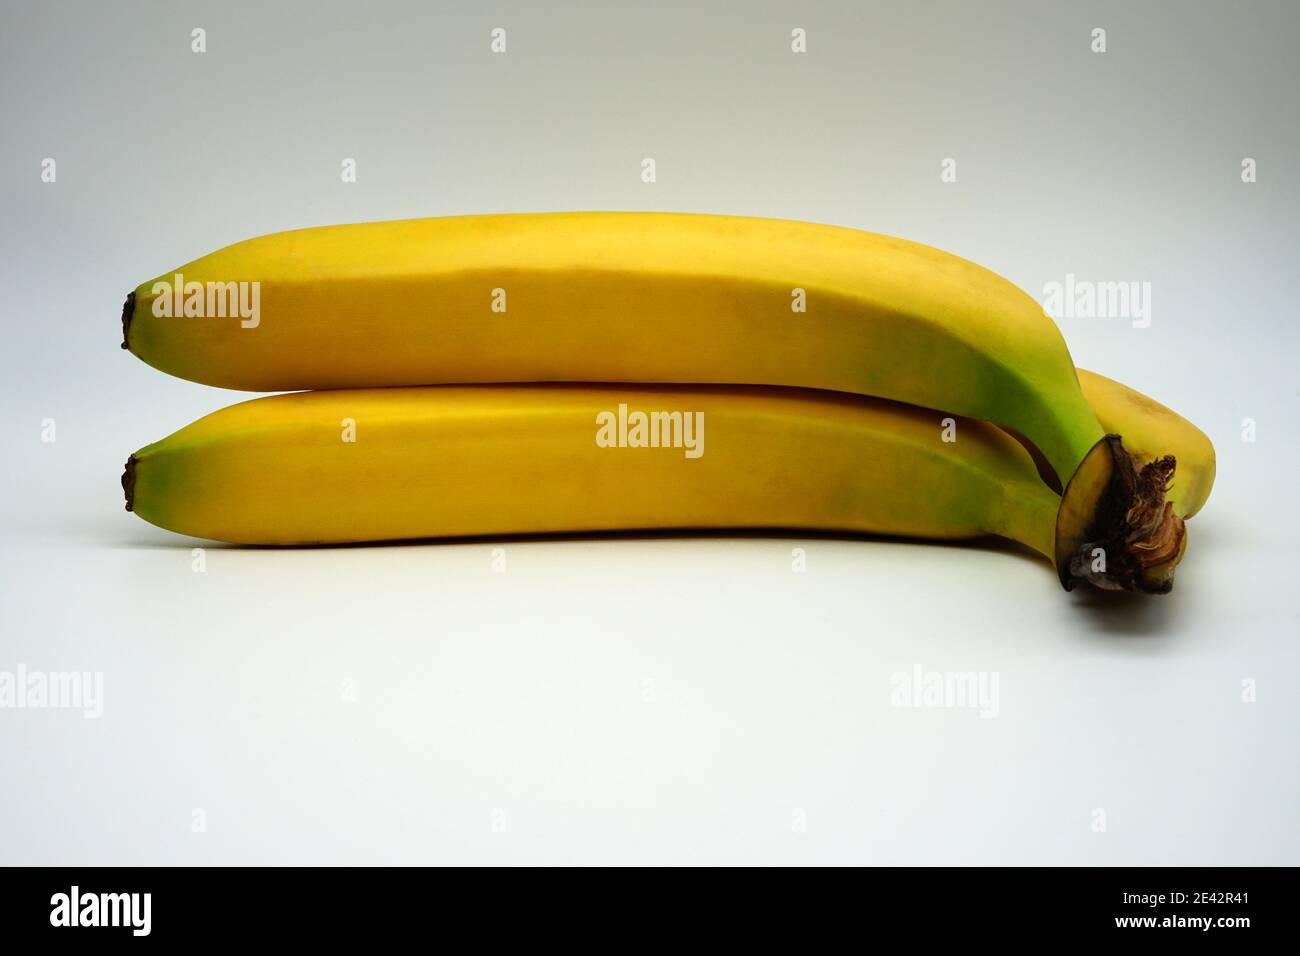 A bunch of ripe bananas ready to eat Stock Photo